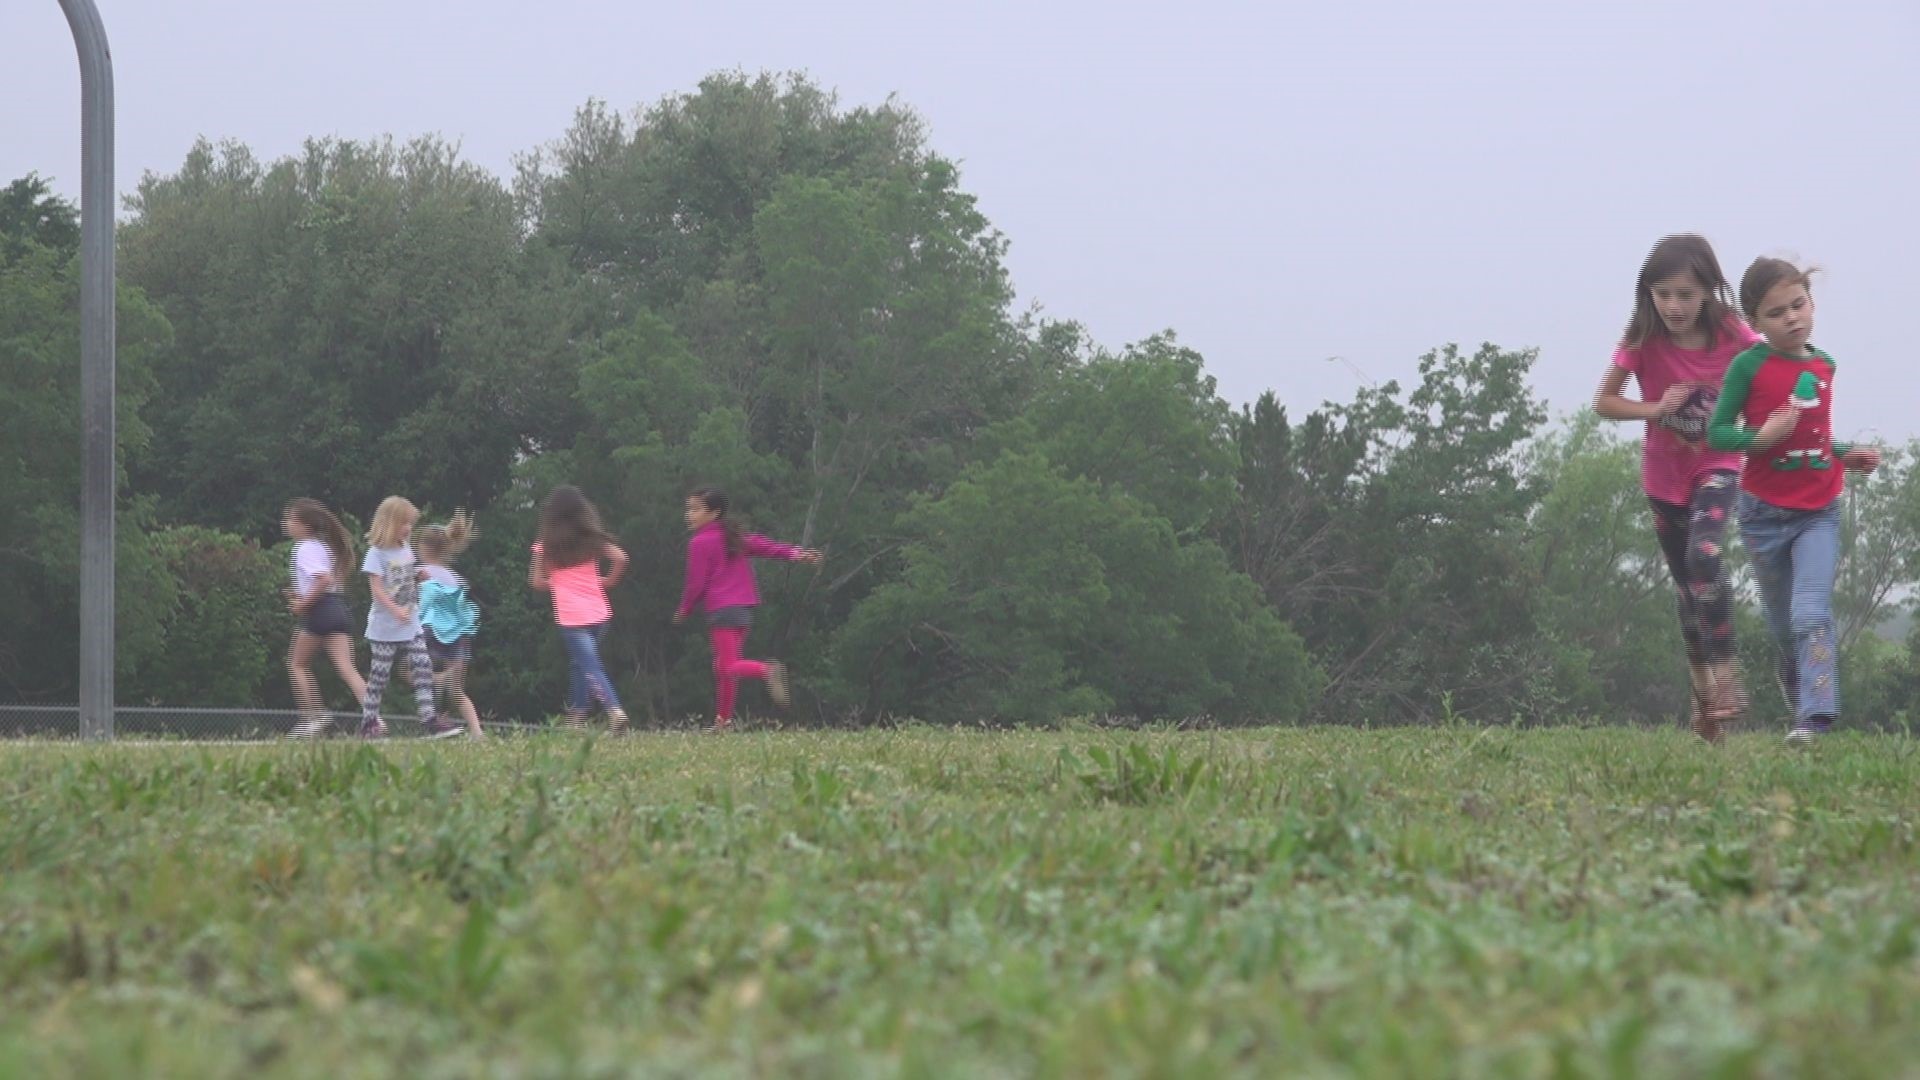 Students in Copperas Cove run every with their Marathon Kids running club. This has helped students gain confidence and become more focused. Maria Aguilera reports.